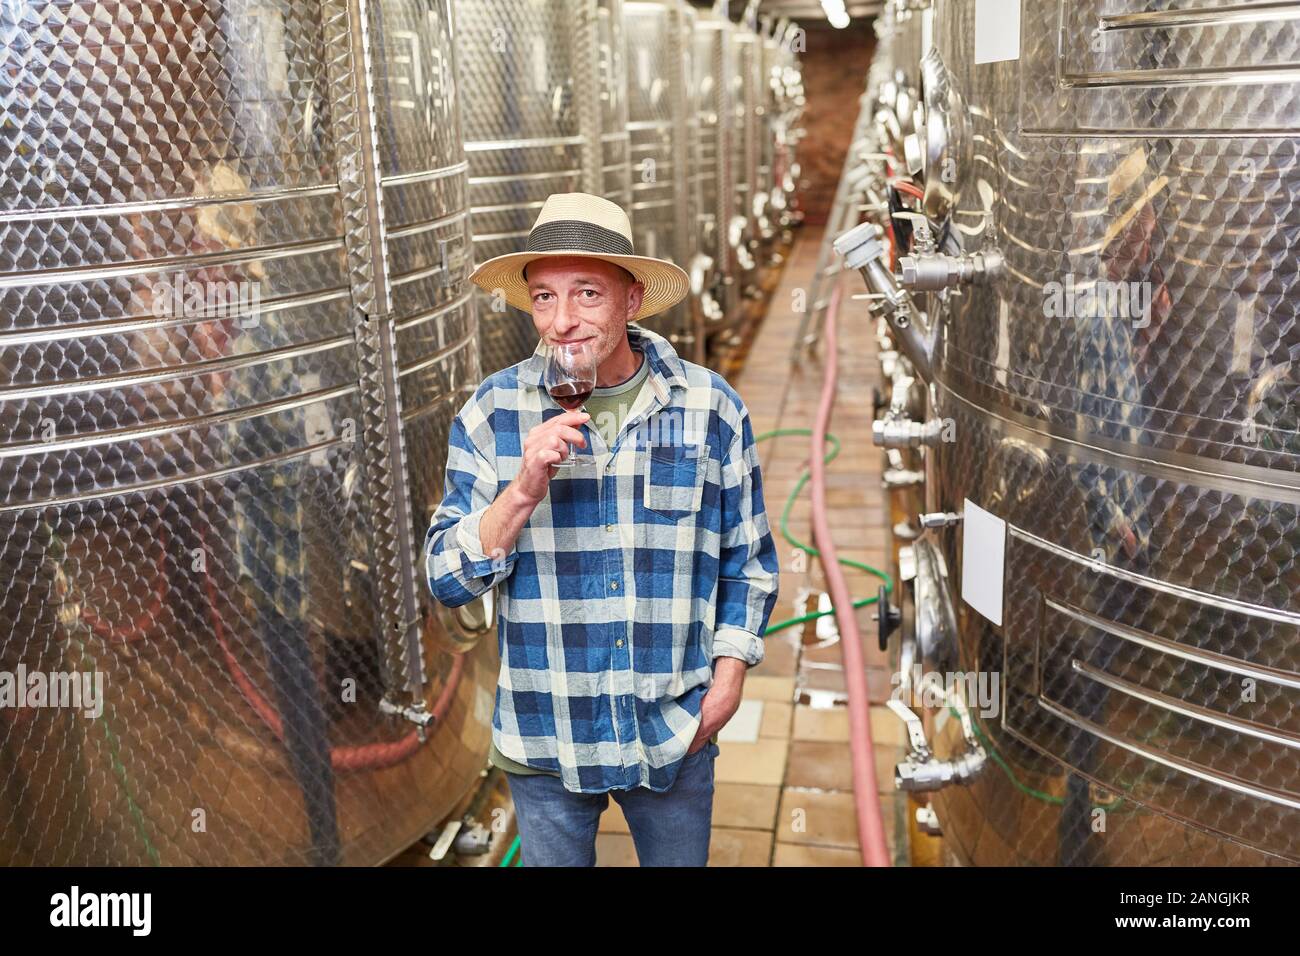 Master winemaker with a glass of red wine in the winery in front of a fermentation tank Stock Photo